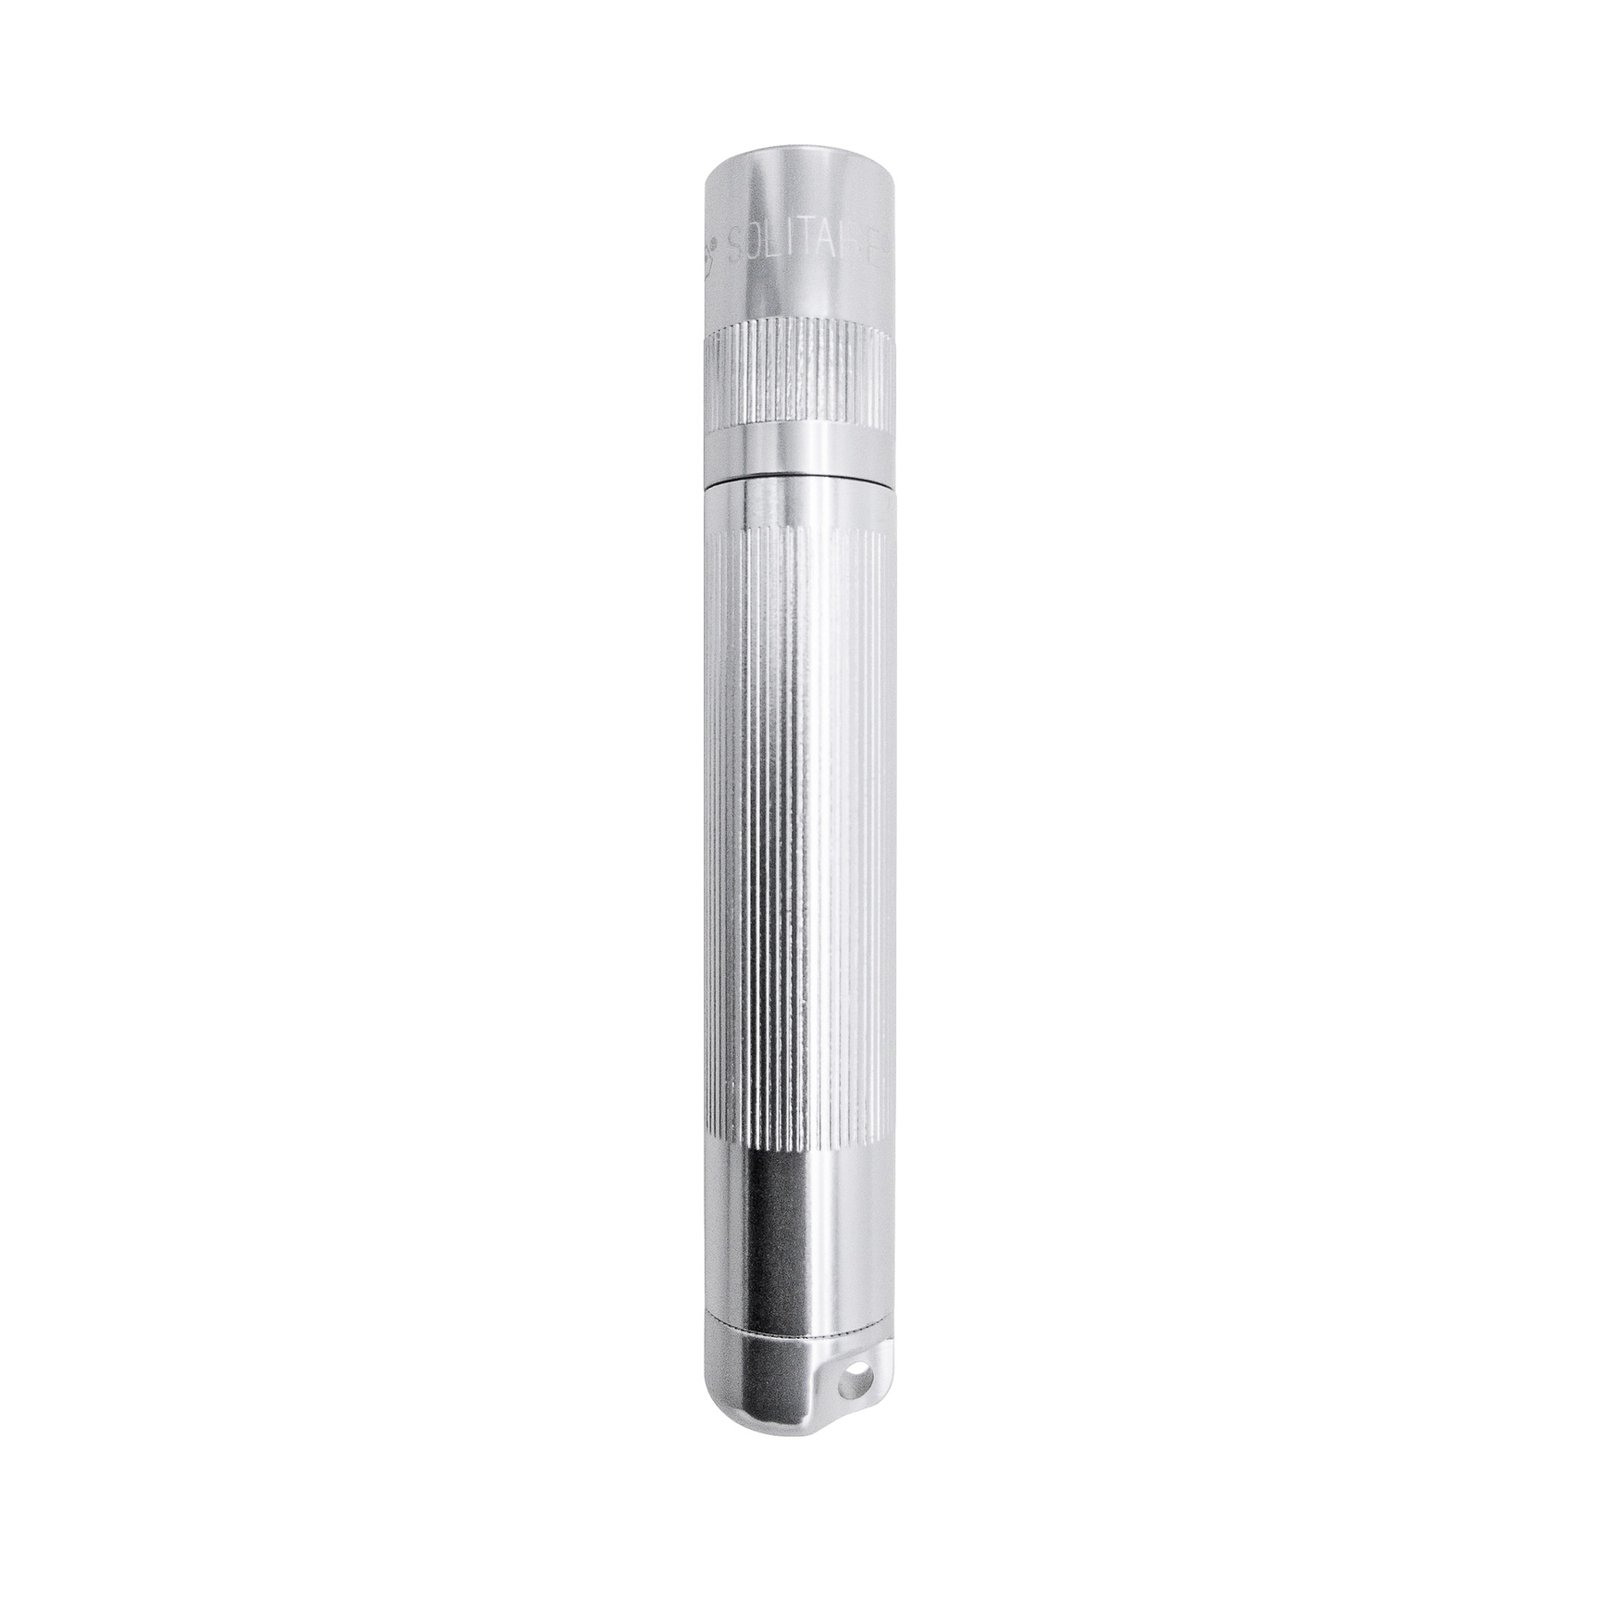 Maglite zaklamp Solitaire 1 Cell AAA, box, zilver